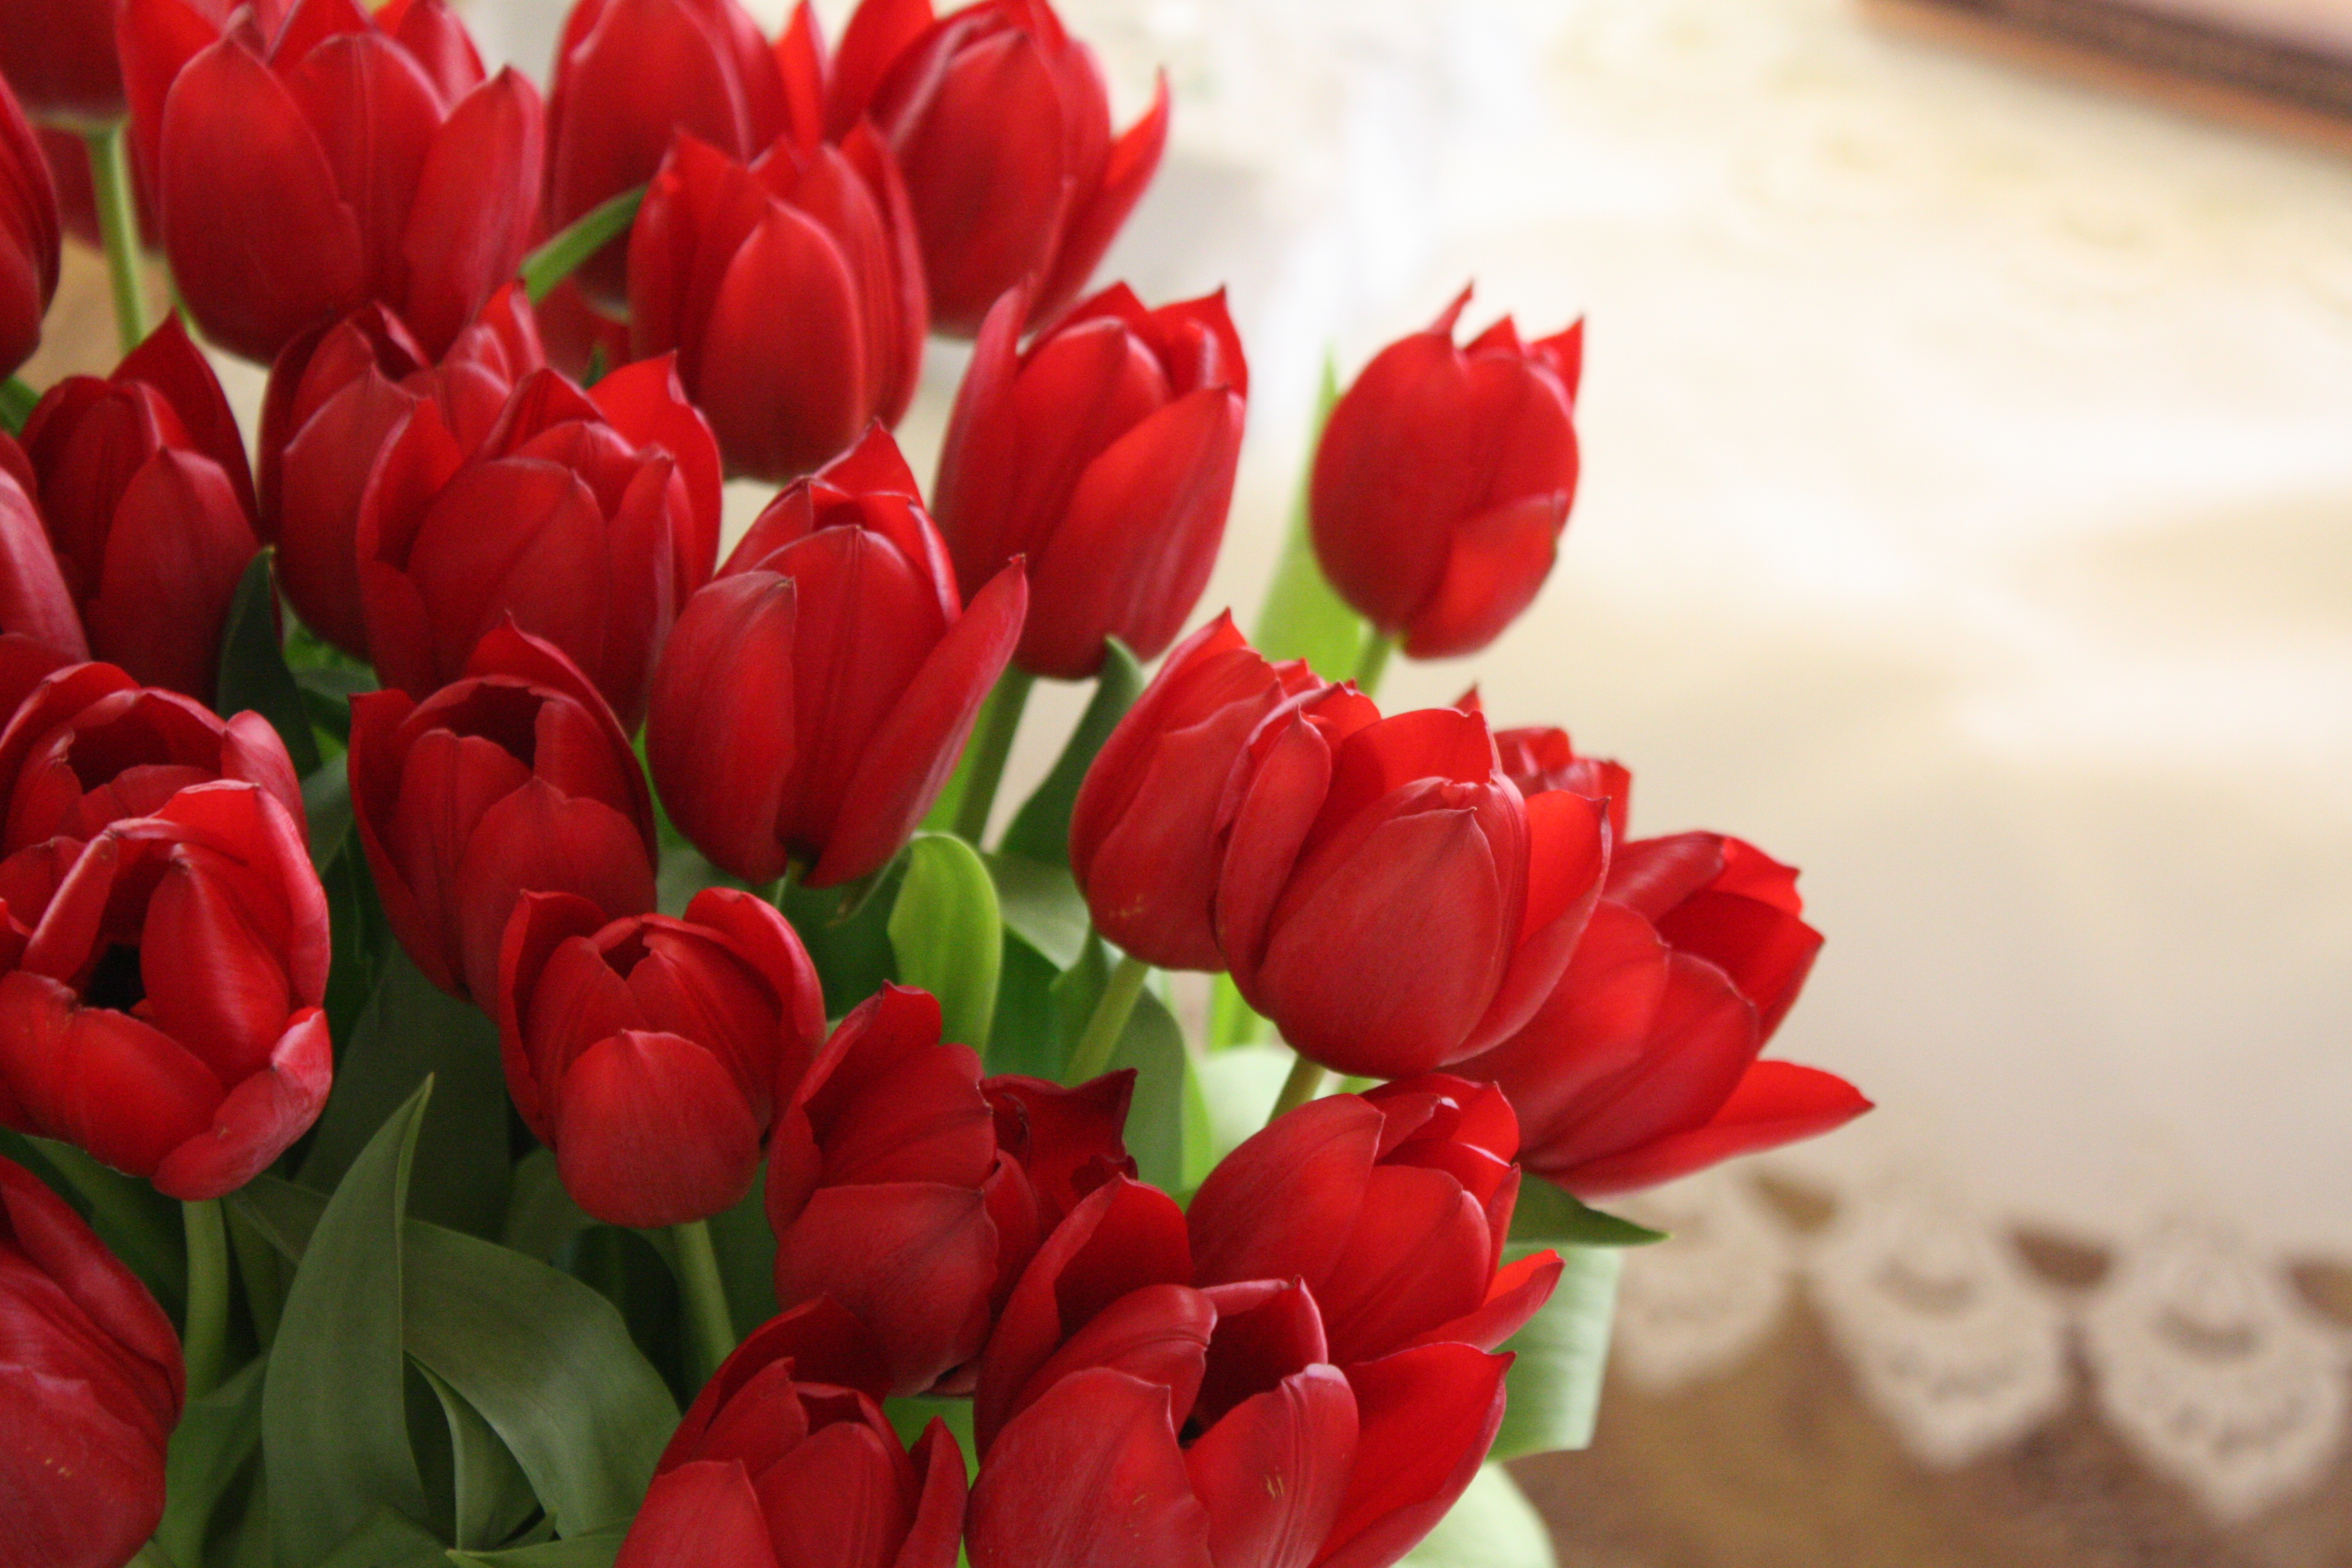 flowers, tulips, red, bouquet, handsomely, it's beautiful High Definition image